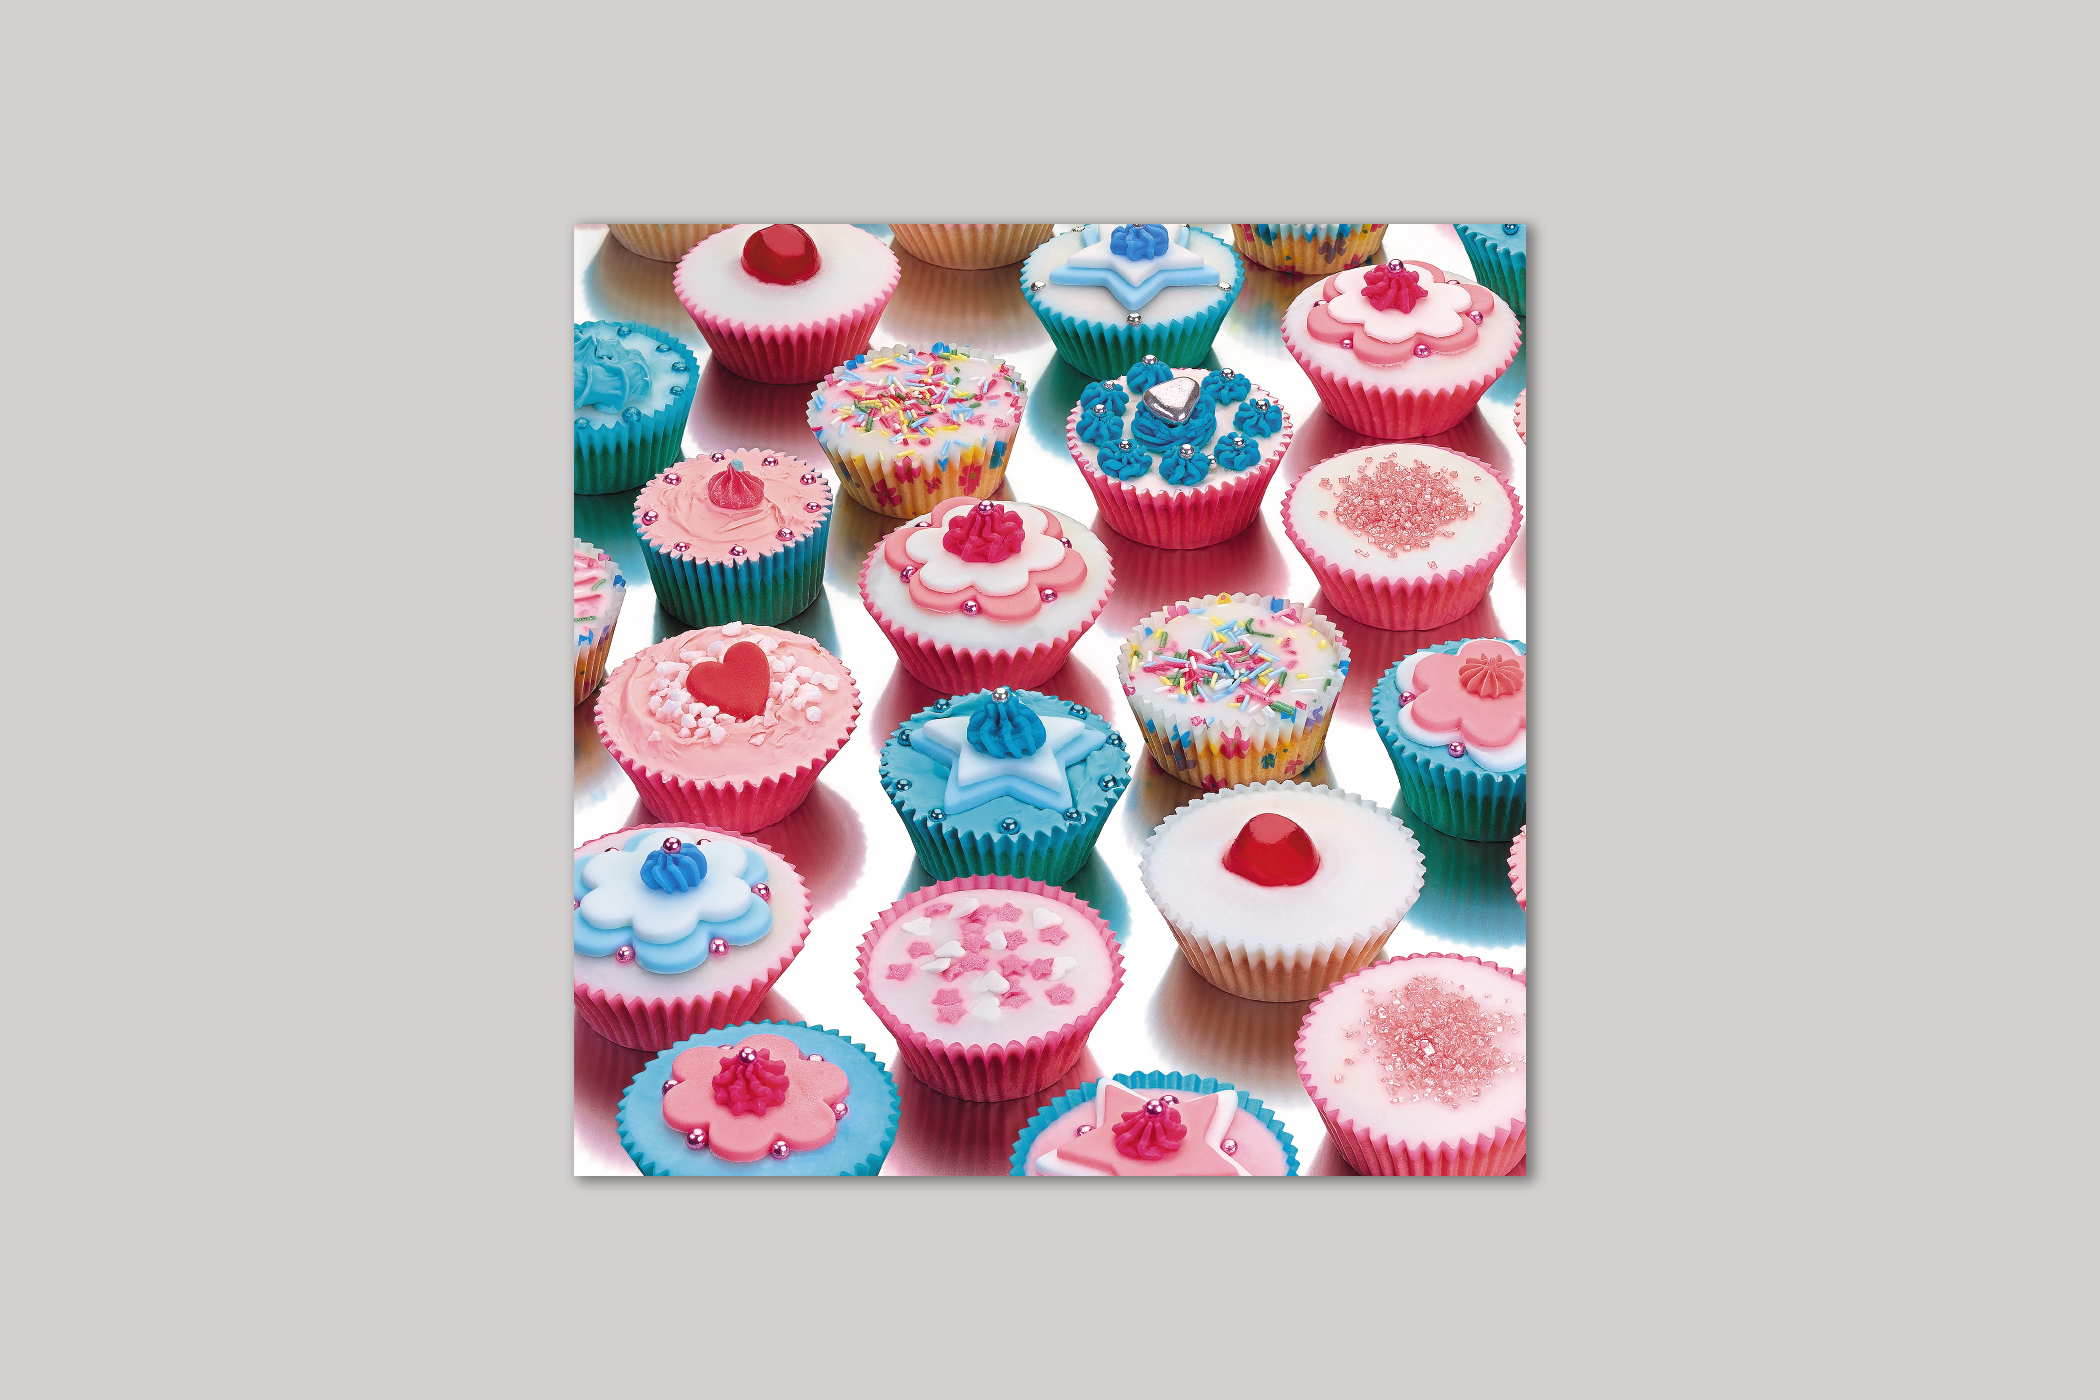 Fancy Cupcakes from Exposure range of photographic cards by Icon.